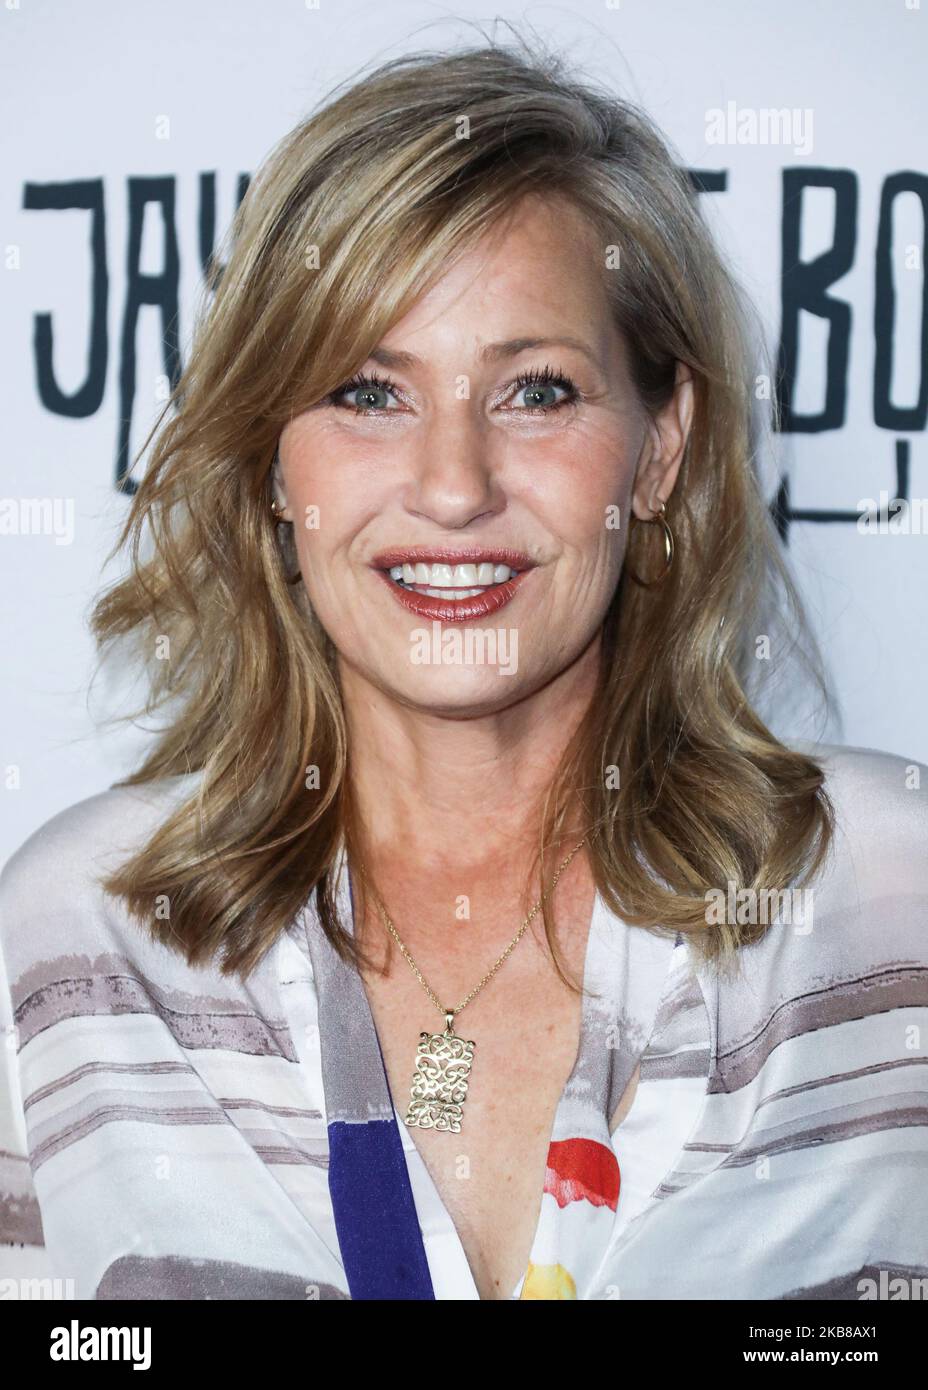 HOLLYWOOD, LOS ANGELES, CALIFORNIA, USA - OCTOBER 14: Actress Joey Lauren Adams arrives at the Los Angeles Premiere Of Saban Films' 'Jay and Silent Bob Reboot' held at the TCL Chinese Theatre IMAX on October 14, 2019 in Hollywood, Los Angeles, California, United States. (Photo by David Acosta/Image Press Agency/NurPhoto) Stock Photo